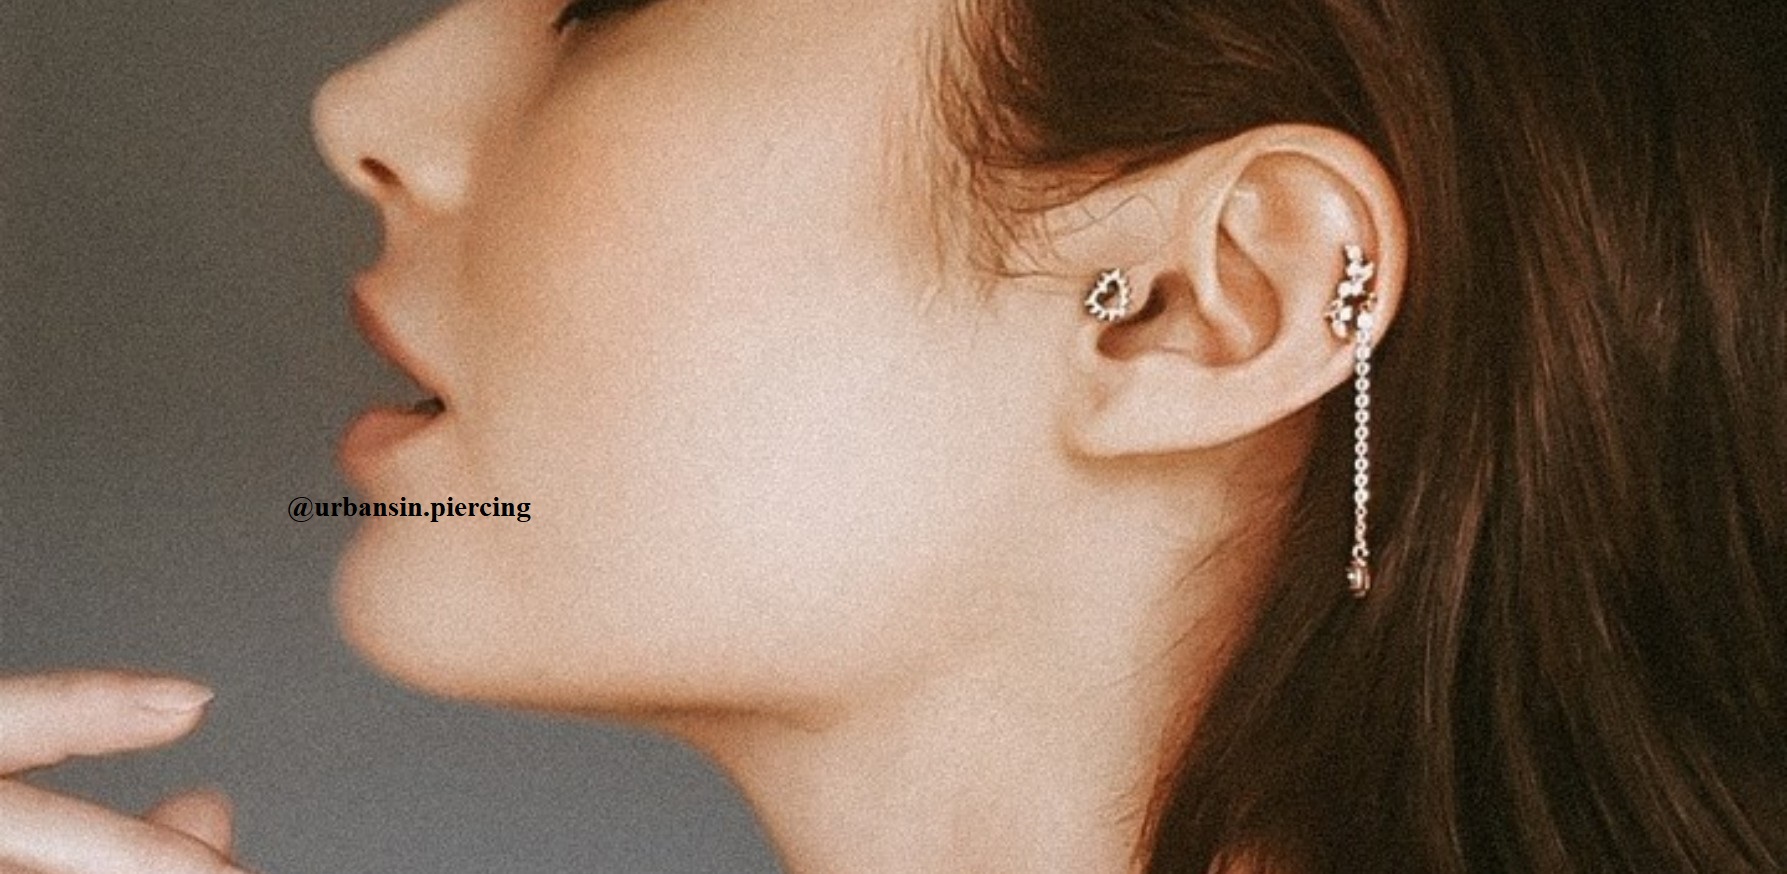 Enhance Your Cool-Girl Look With These Sassy Ear Piercing Ideas